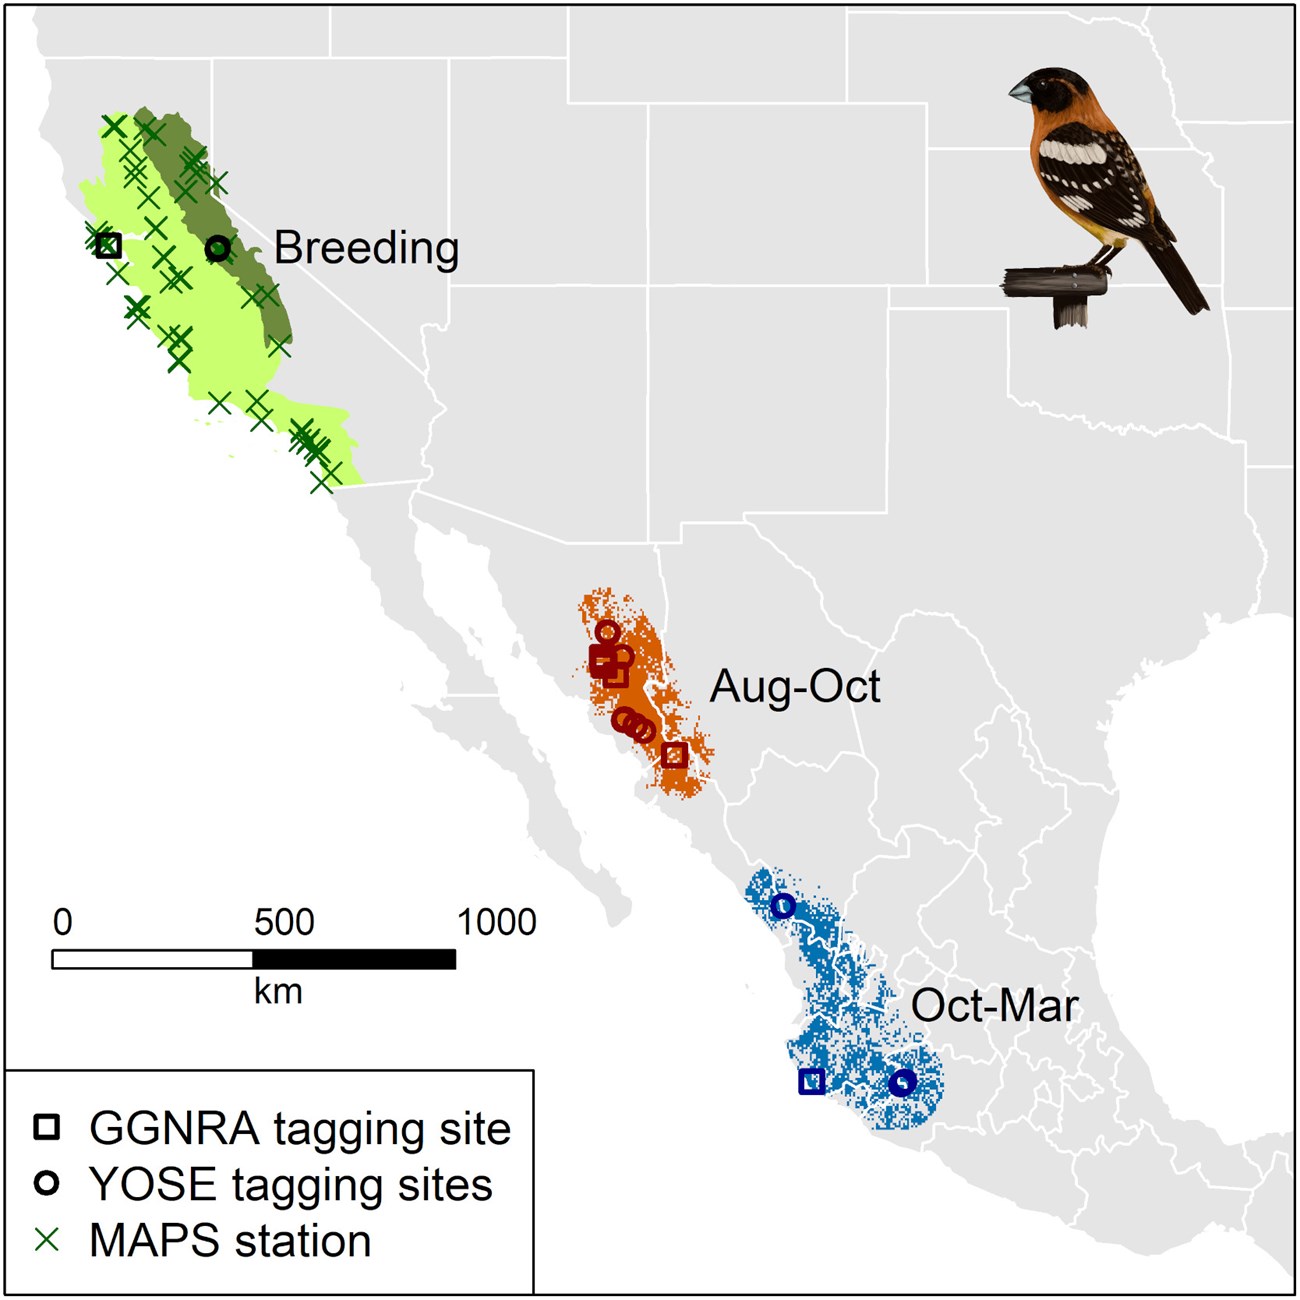 Map with black-headed grosbeak ranges overlayed. Two populations' breeding ranges are along the California Coast and another further inland. The molting range is located in northwestern Mexico. The winter range appears further south in western Mexico.